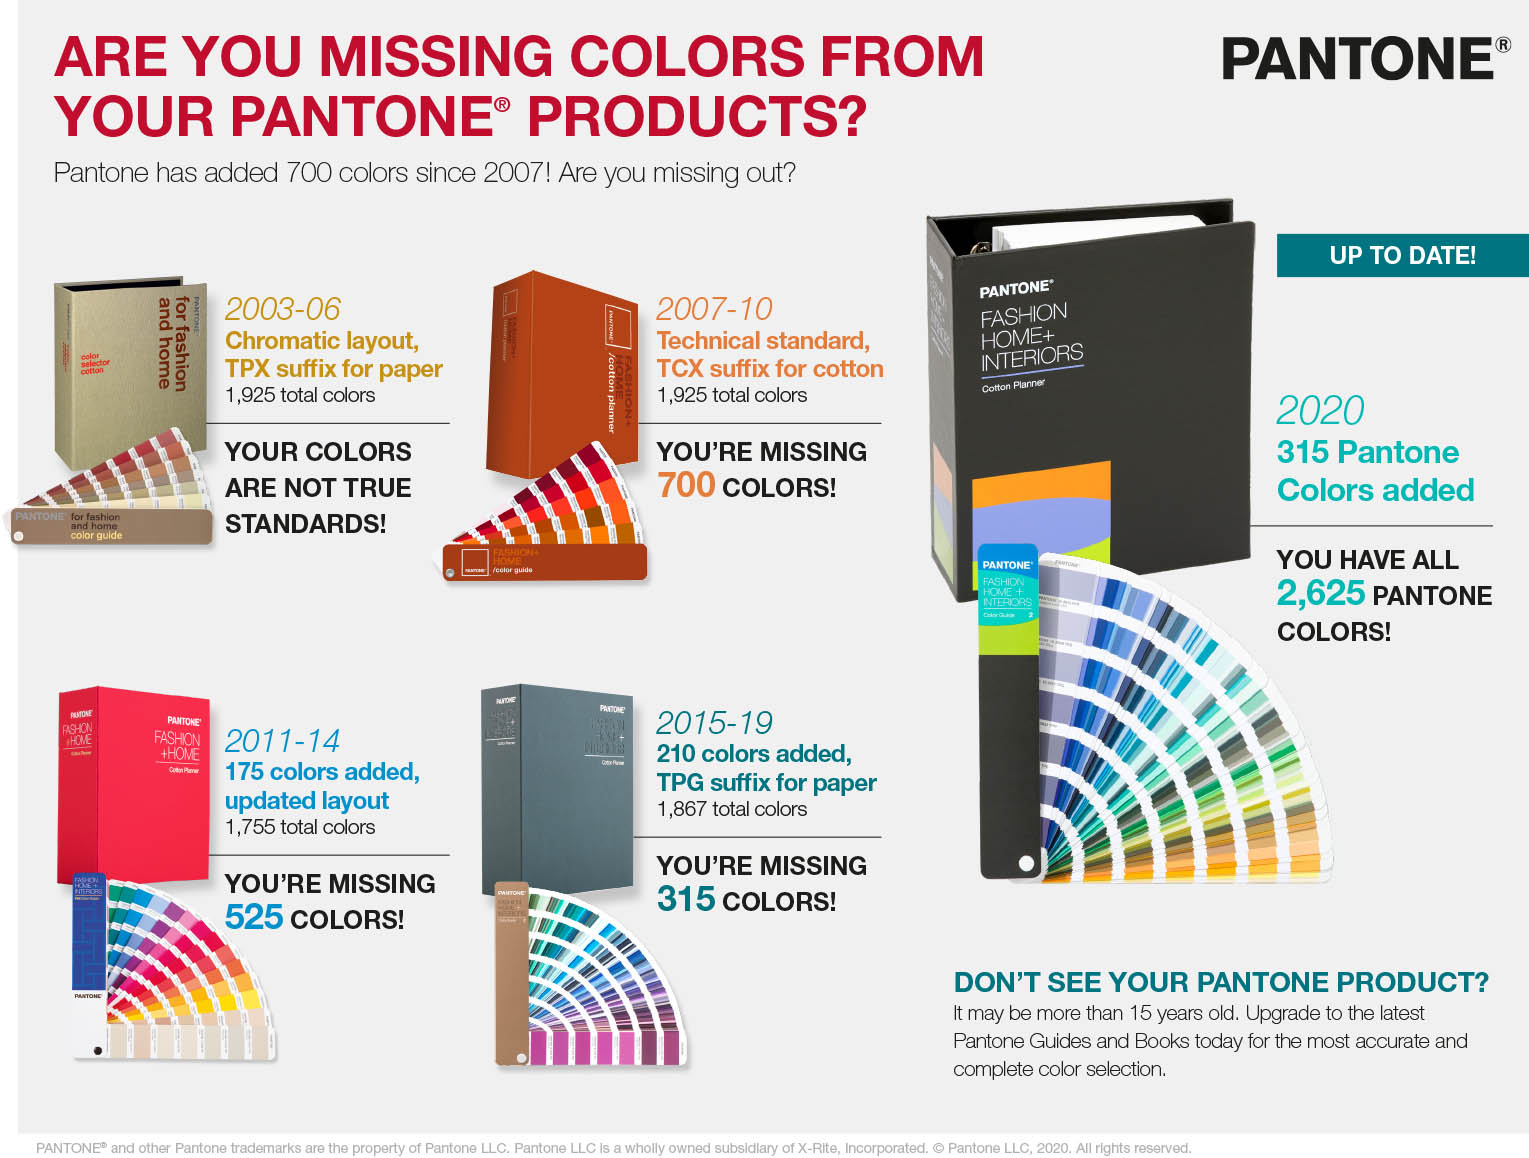 History of Color Additions to Pantone FHI range